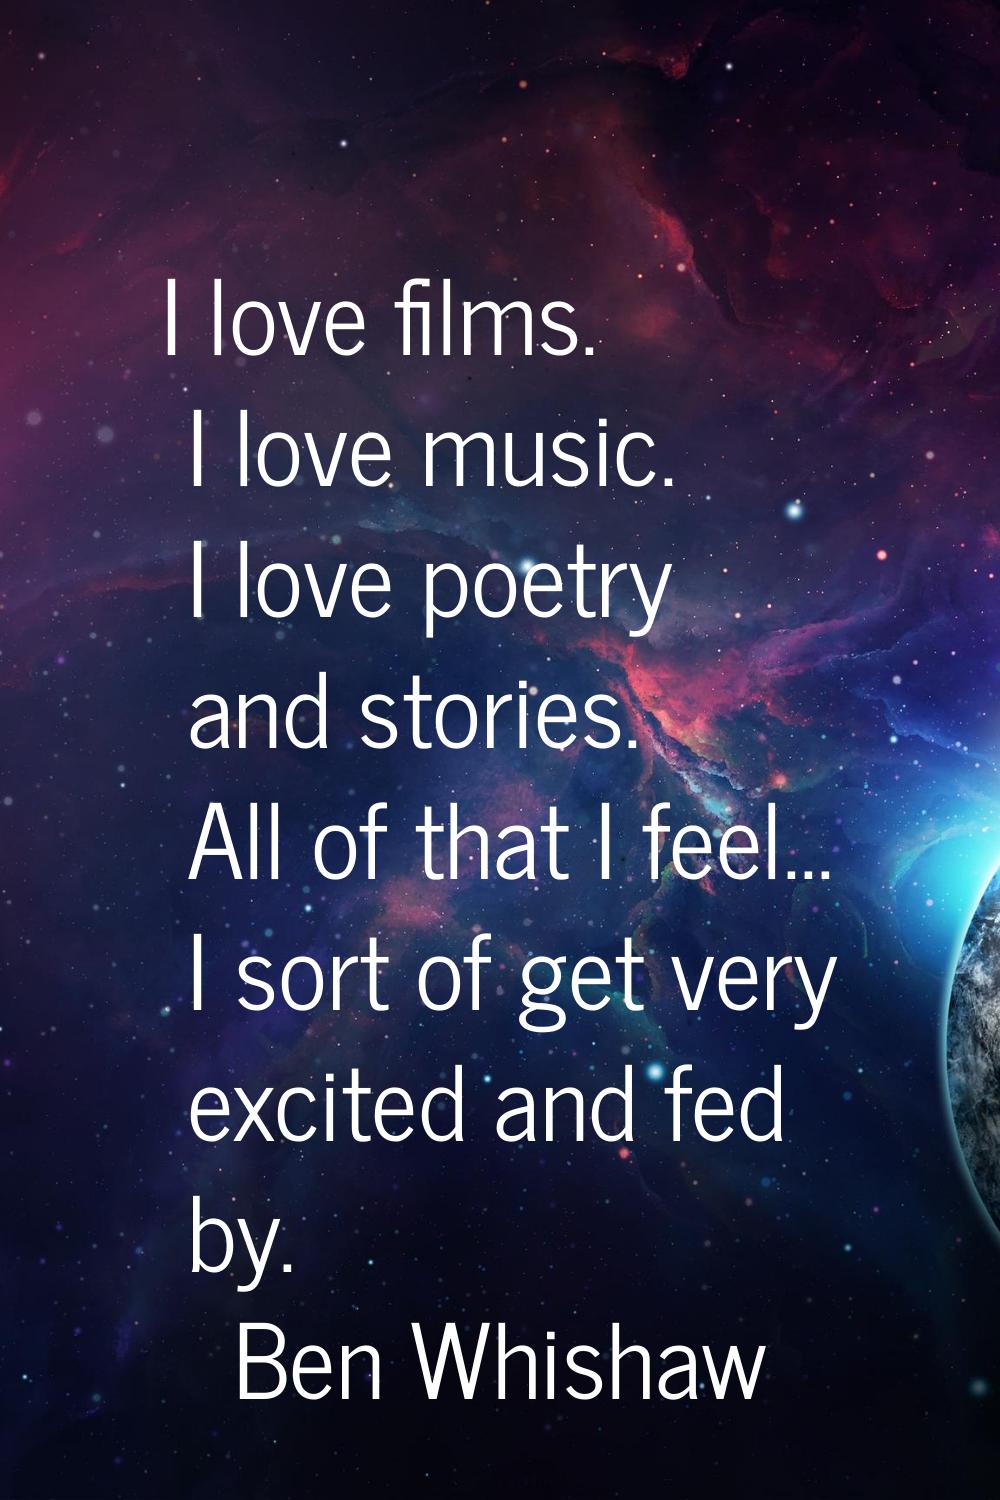 I love films. I love music. I love poetry and stories. All of that I feel... I sort of get very exc